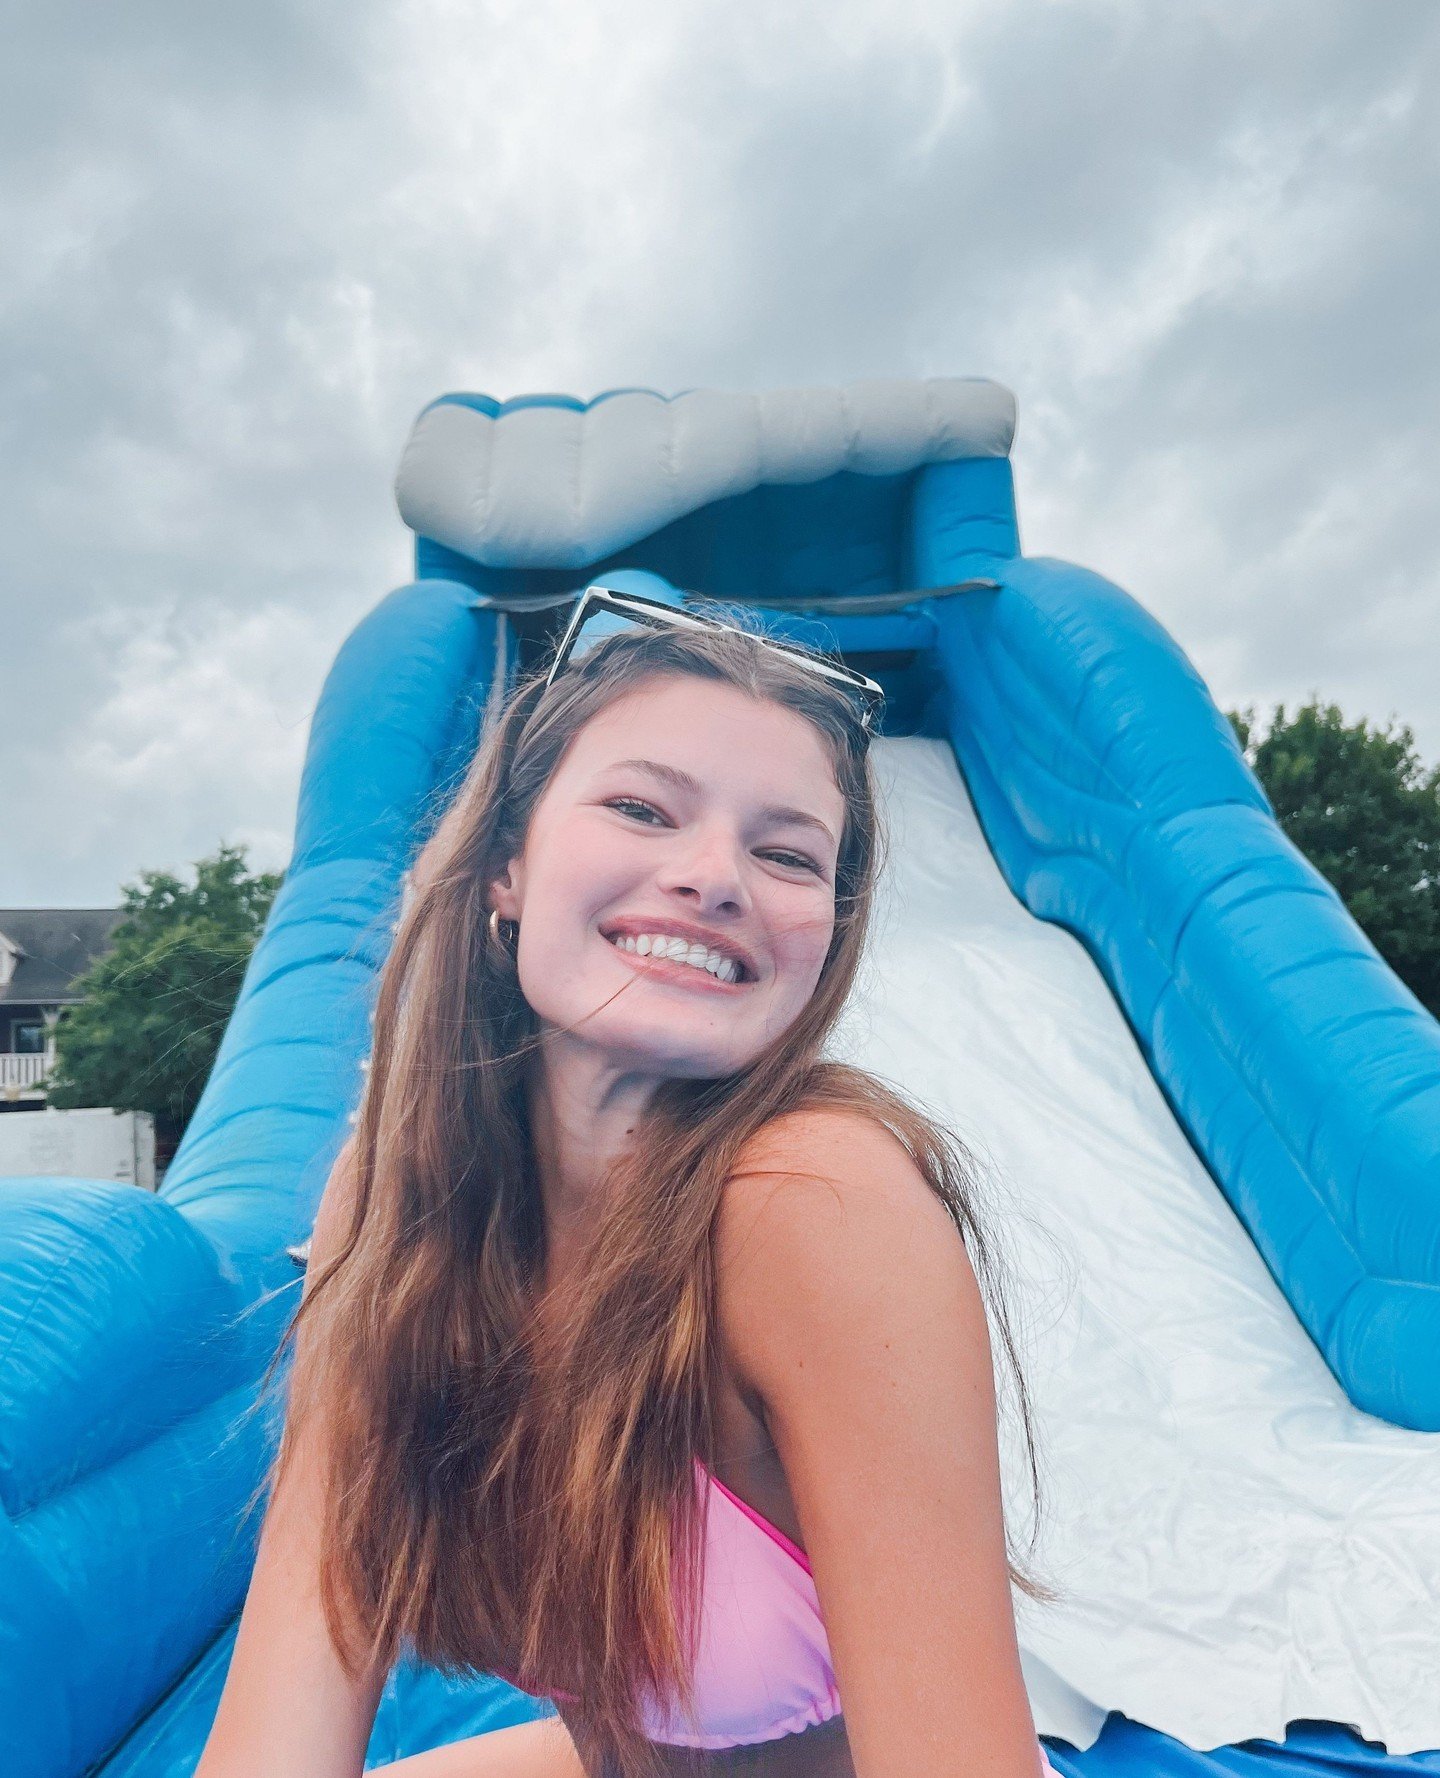 Sunshine, smiles, and good times - we're the happiest here at The Cottages! Join us for an unforgettable summer and create memories you'll cherish forever. Give us a call today to learn more about how you can have a RENT-FREE summer &amp; focus on ha